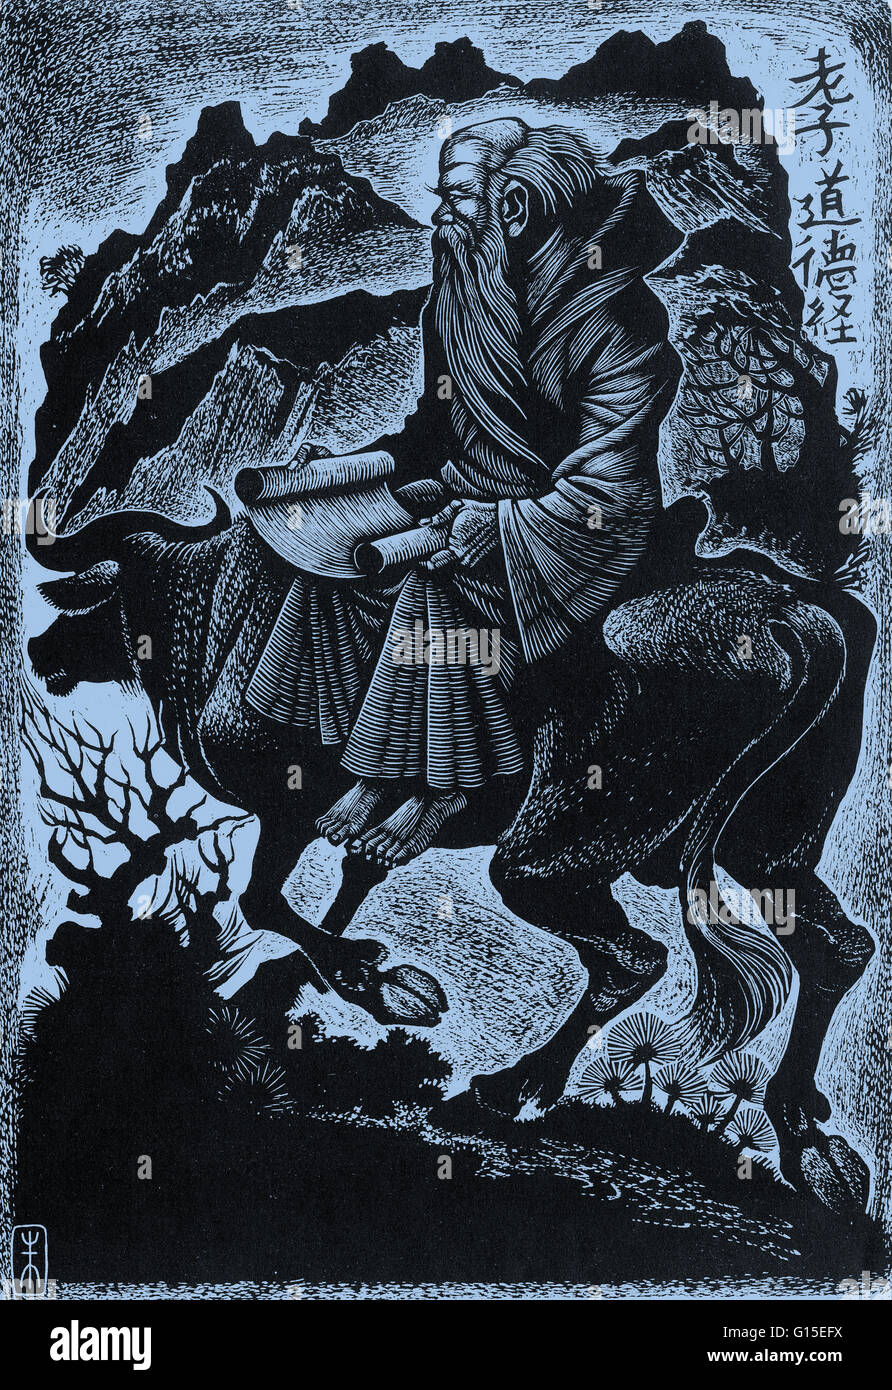 Laozi, wood engraving by Fritz Eichenberg, 1966. Laozi was a philosopher of ancient China, best known as the author of the Tao Te Ching He is considered the founder of philosophical Taoism and is revered as a deity in most religious forms of Taoist philos Stock Photo